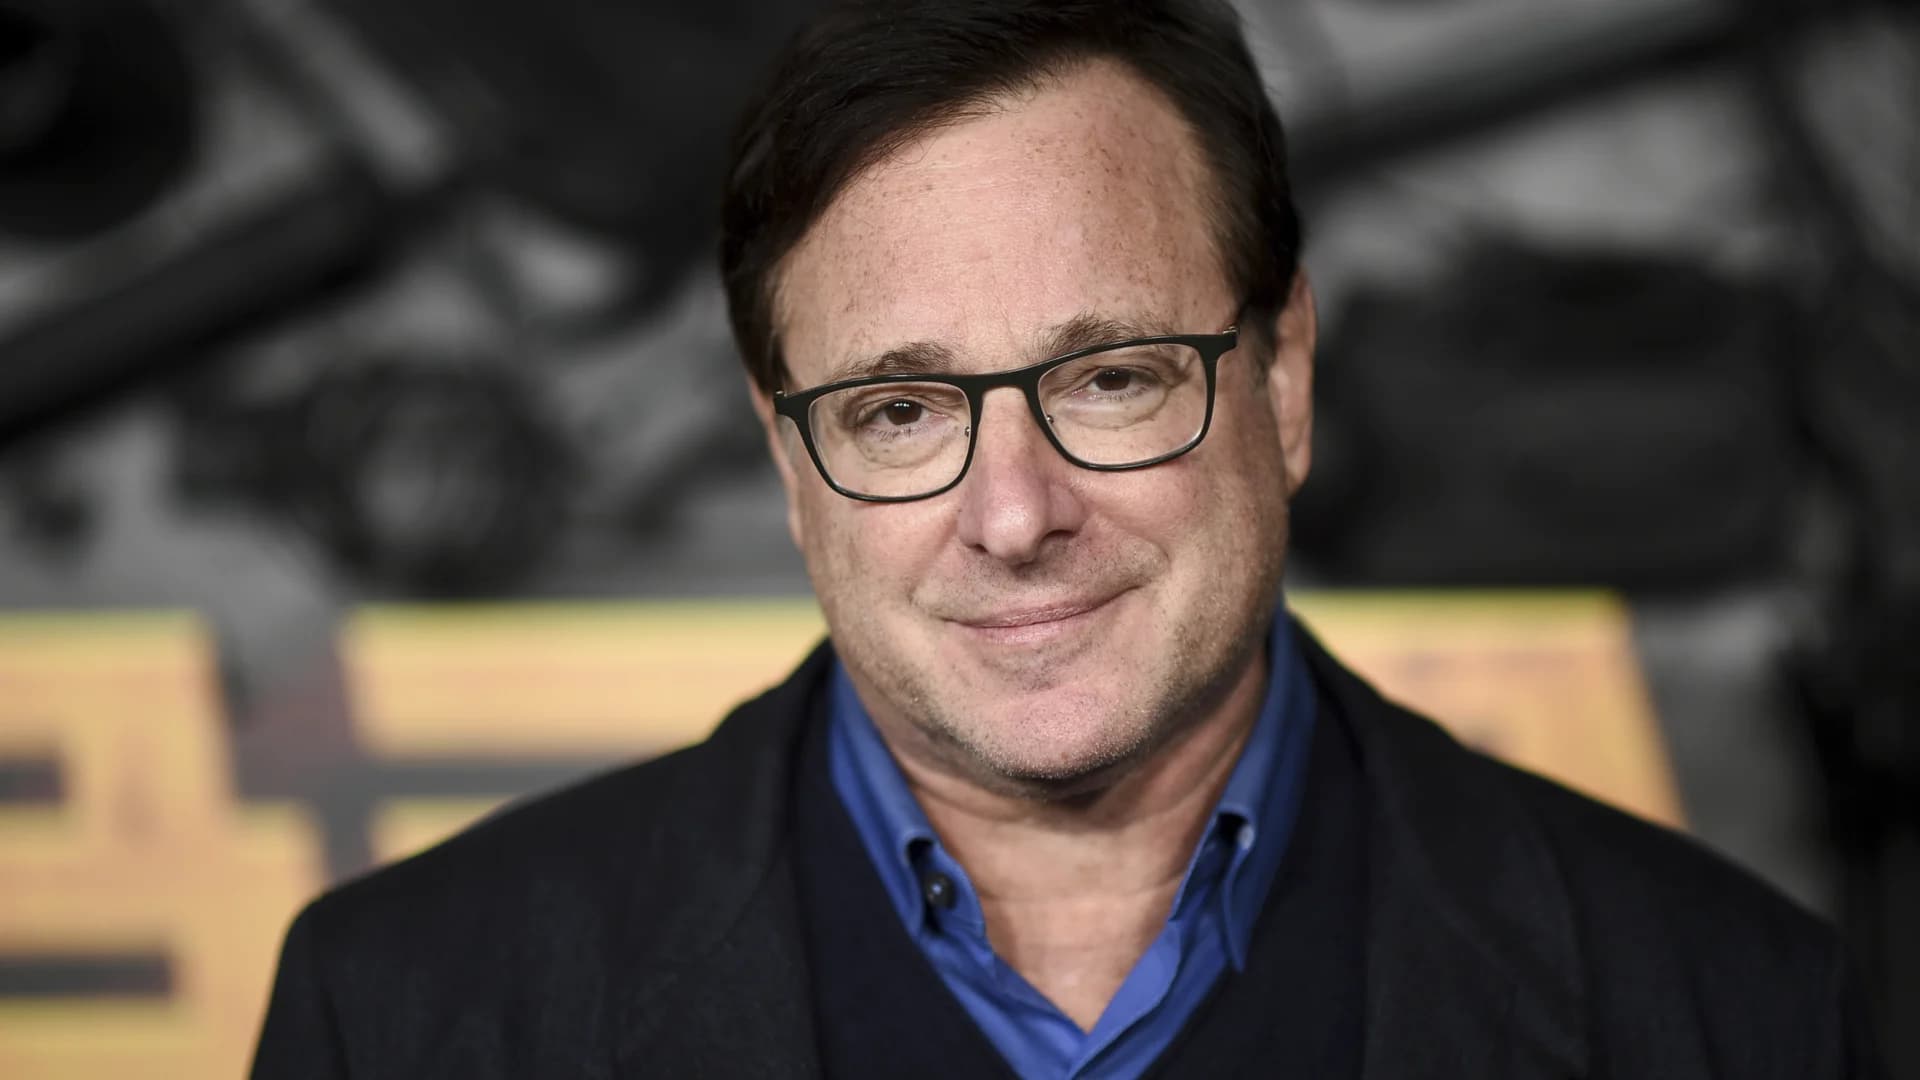 Judge blocks release of Bob Saget's autopsy records for now